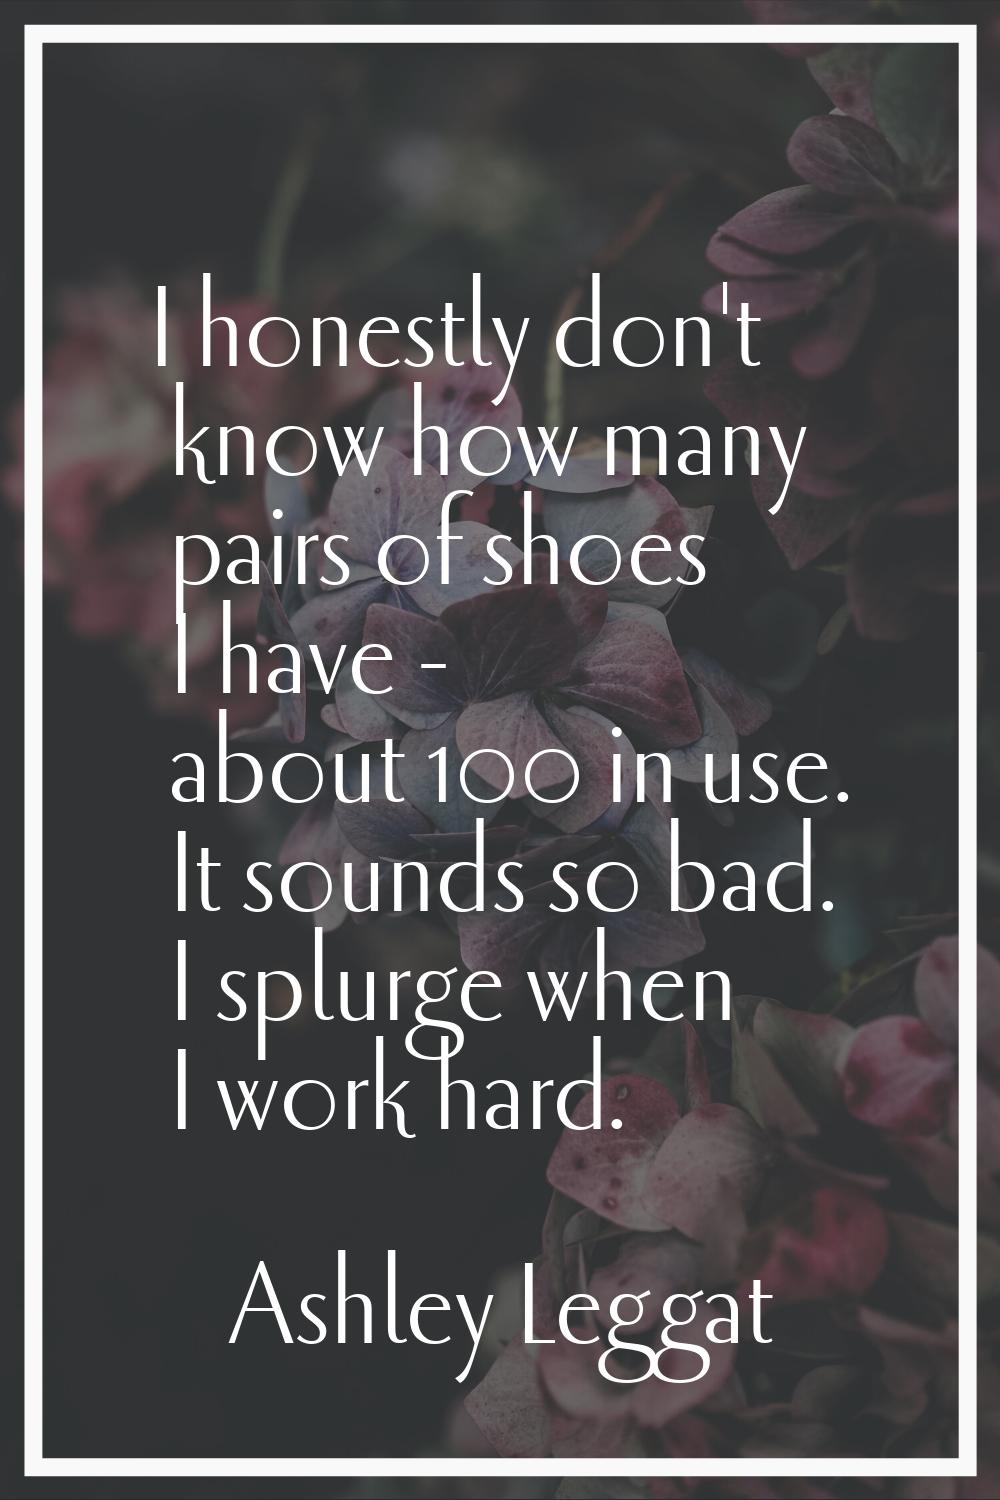 I honestly don't know how many pairs of shoes I have - about 100 in use. It sounds so bad. I splurg